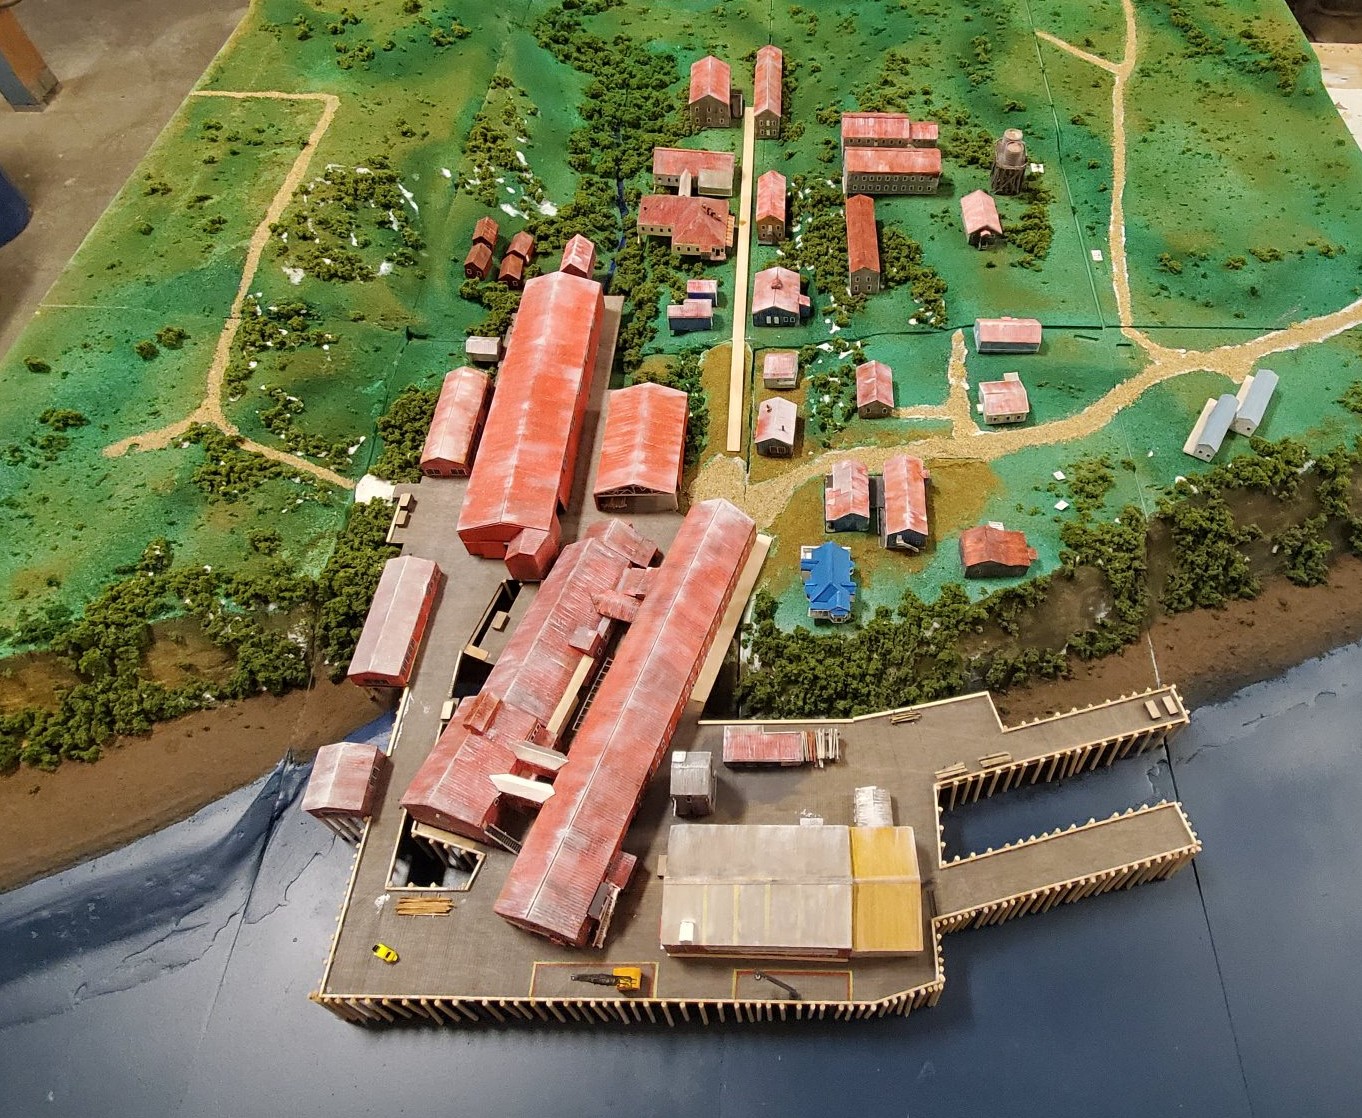 Scale model of the Diamond NN Cannery by Alaskan artist Andrew Abyo